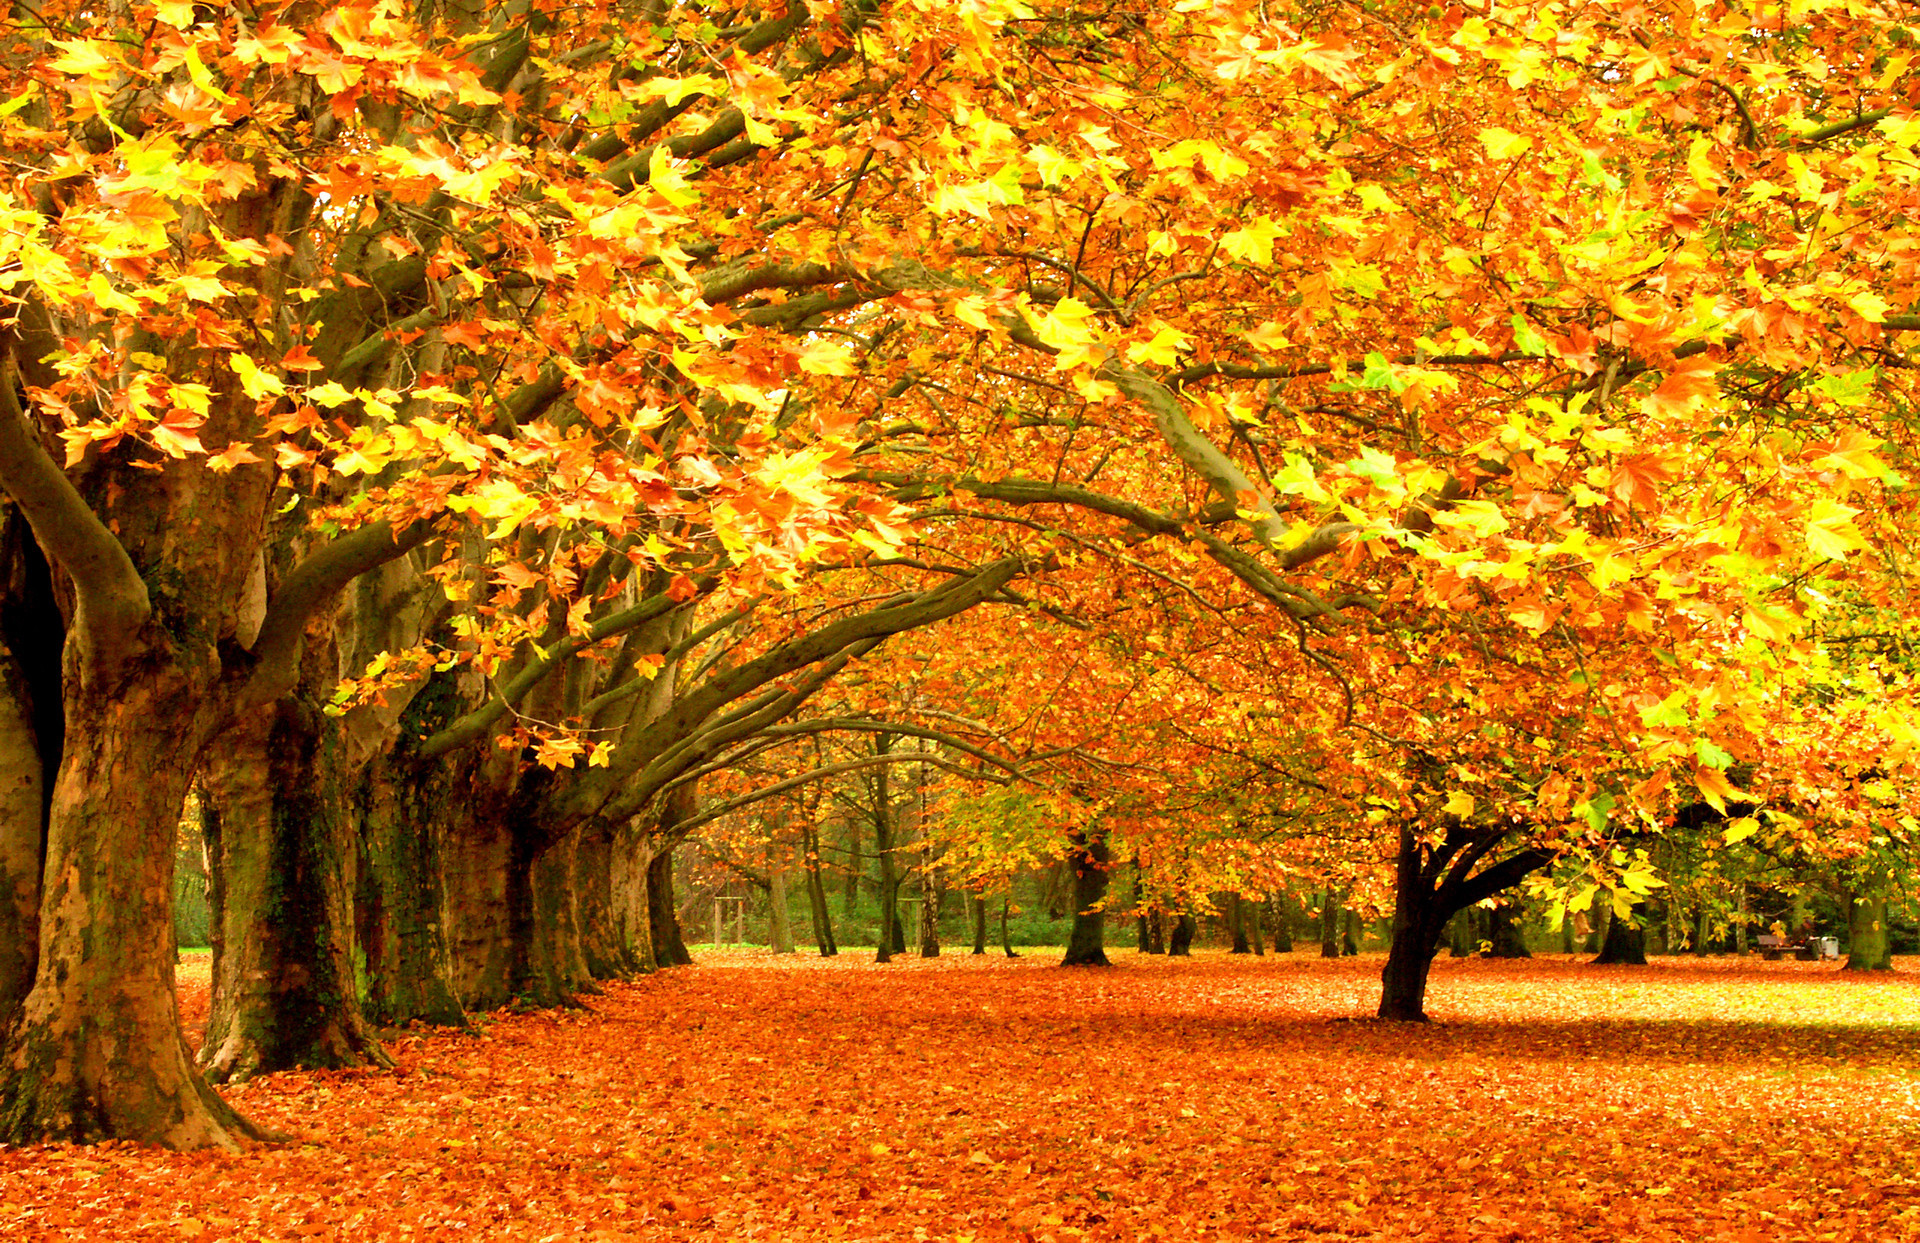 1920x1243 1920x1200 forest, tree, wallpaper,colourful, river backgrounds, seasons,  fall, season,autumn, widescreen, leaf color, high resolution, leaves,  landscape, .